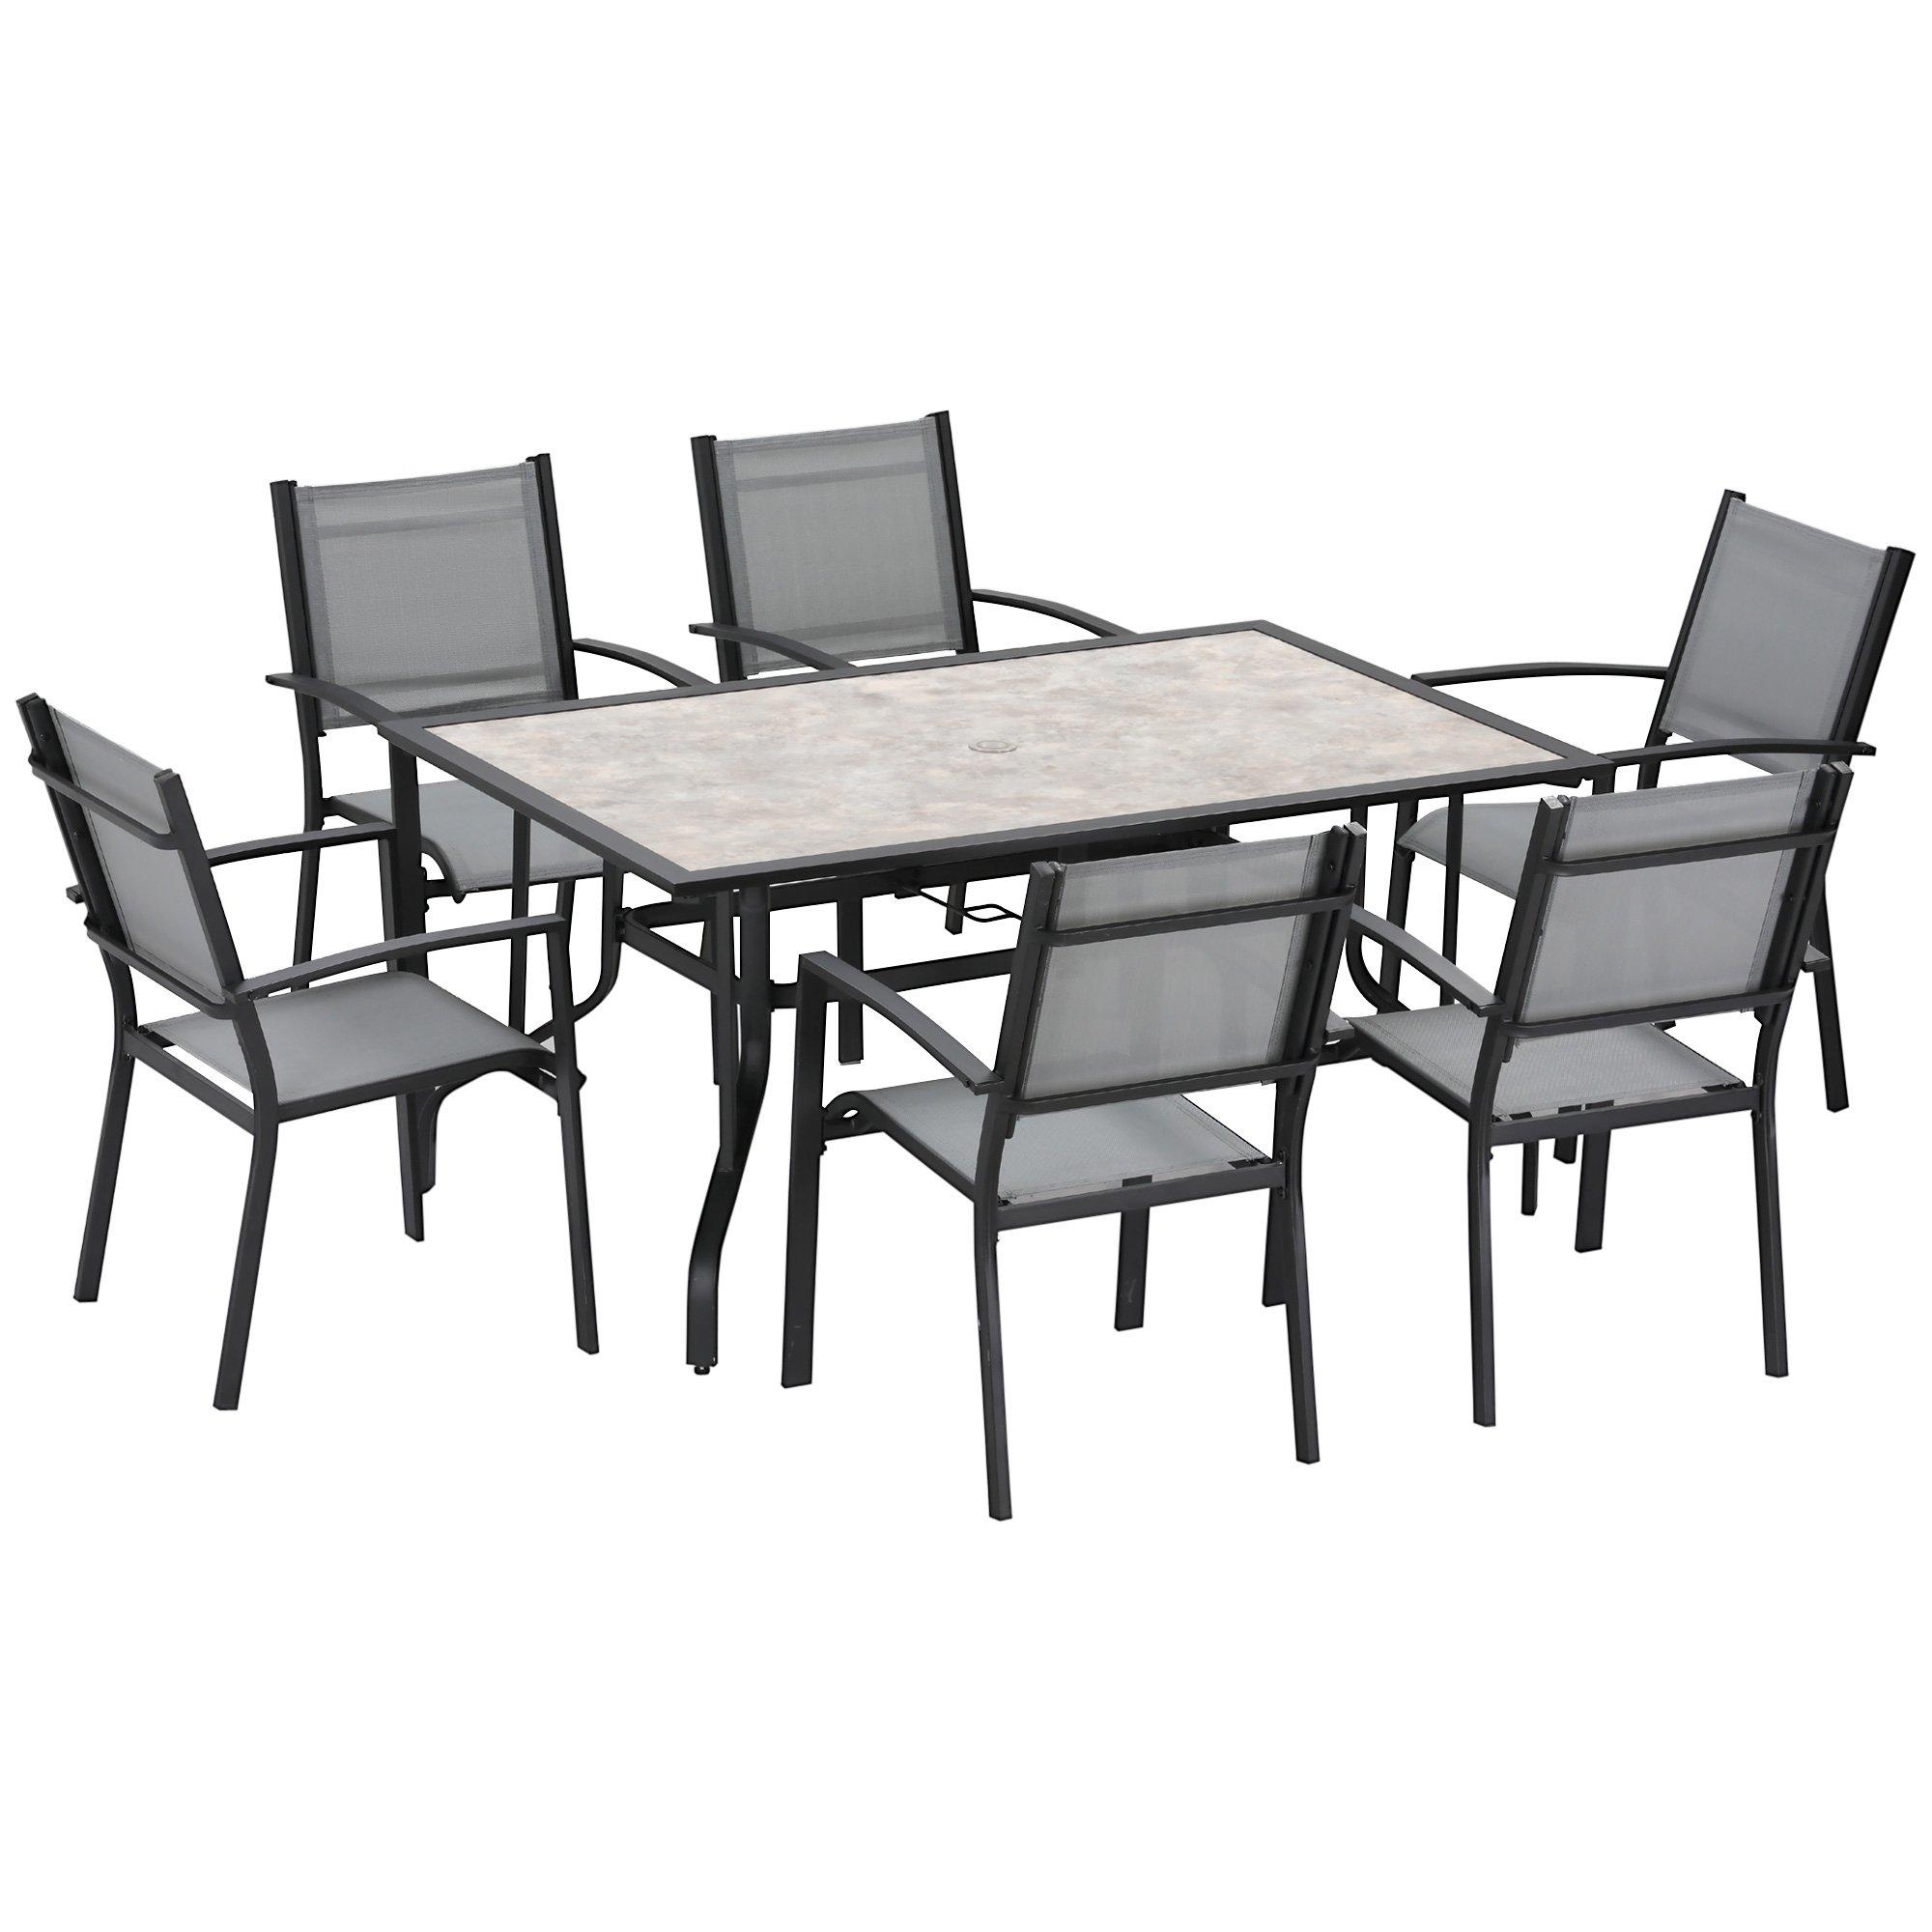 7 Piece Garden Furniture Set with Dining Table Chairs 6 Seater